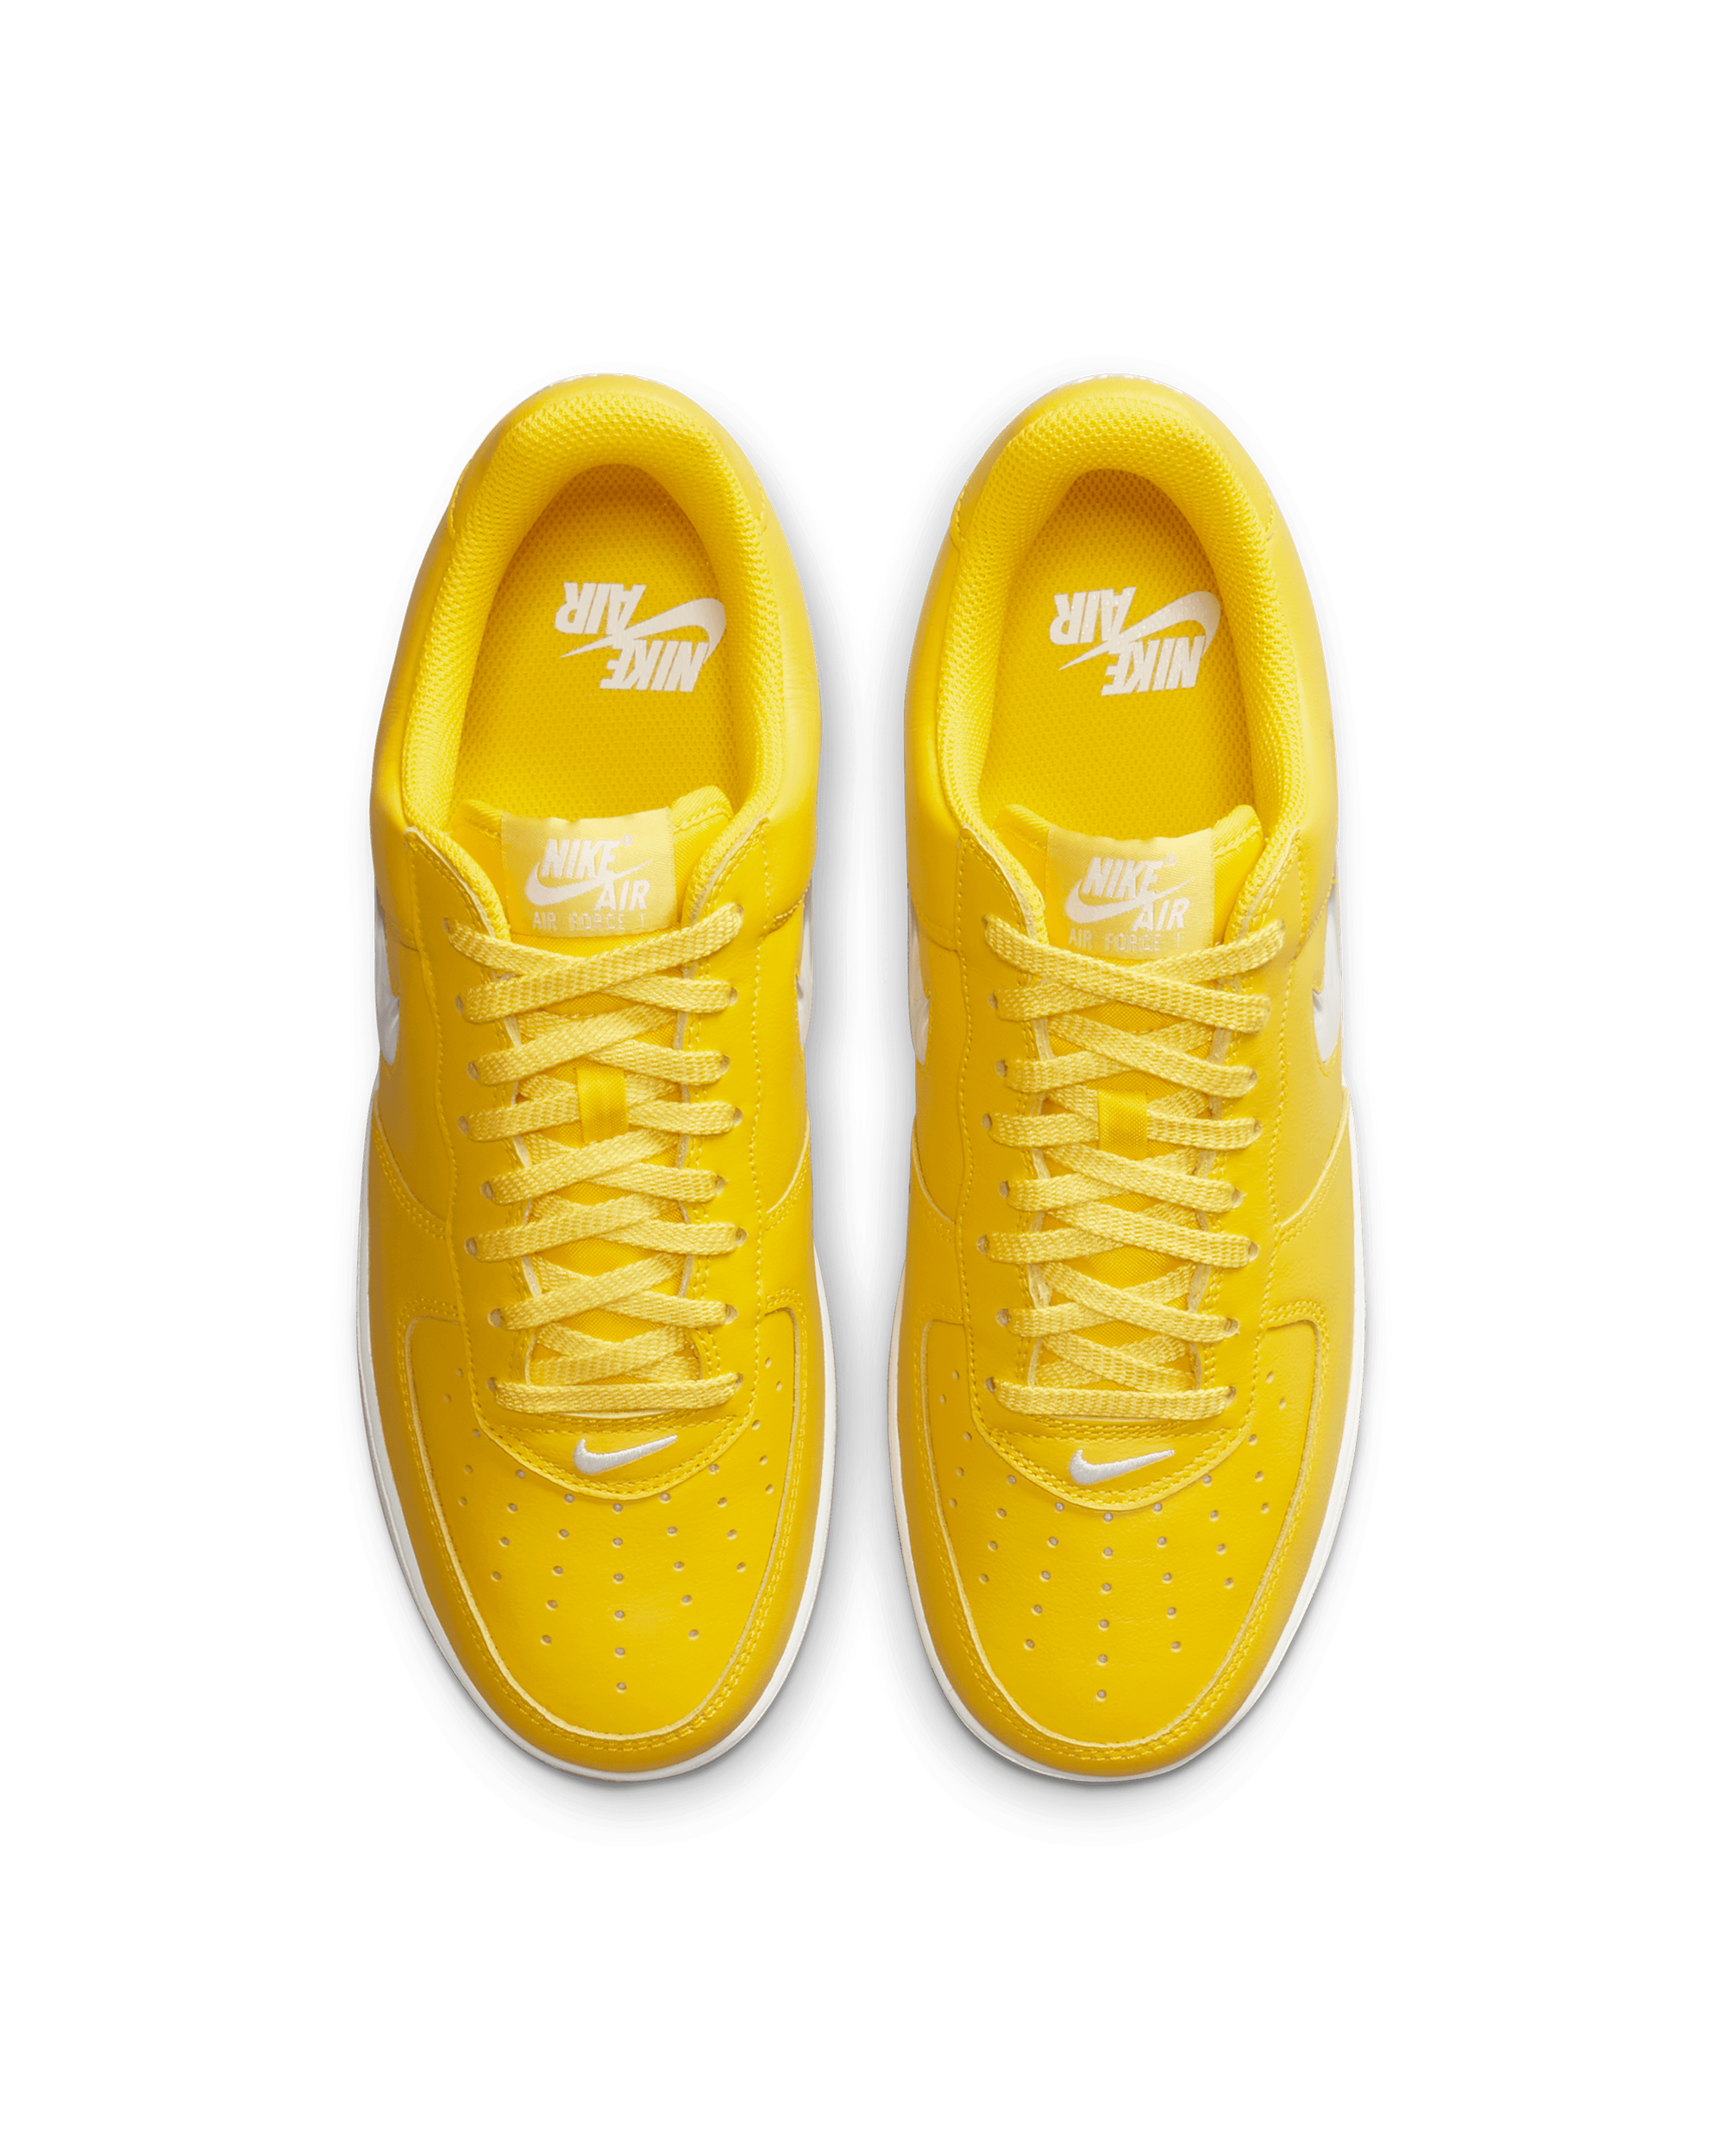 Air Force 1 Low Retro - Speed Yellow / Summit White